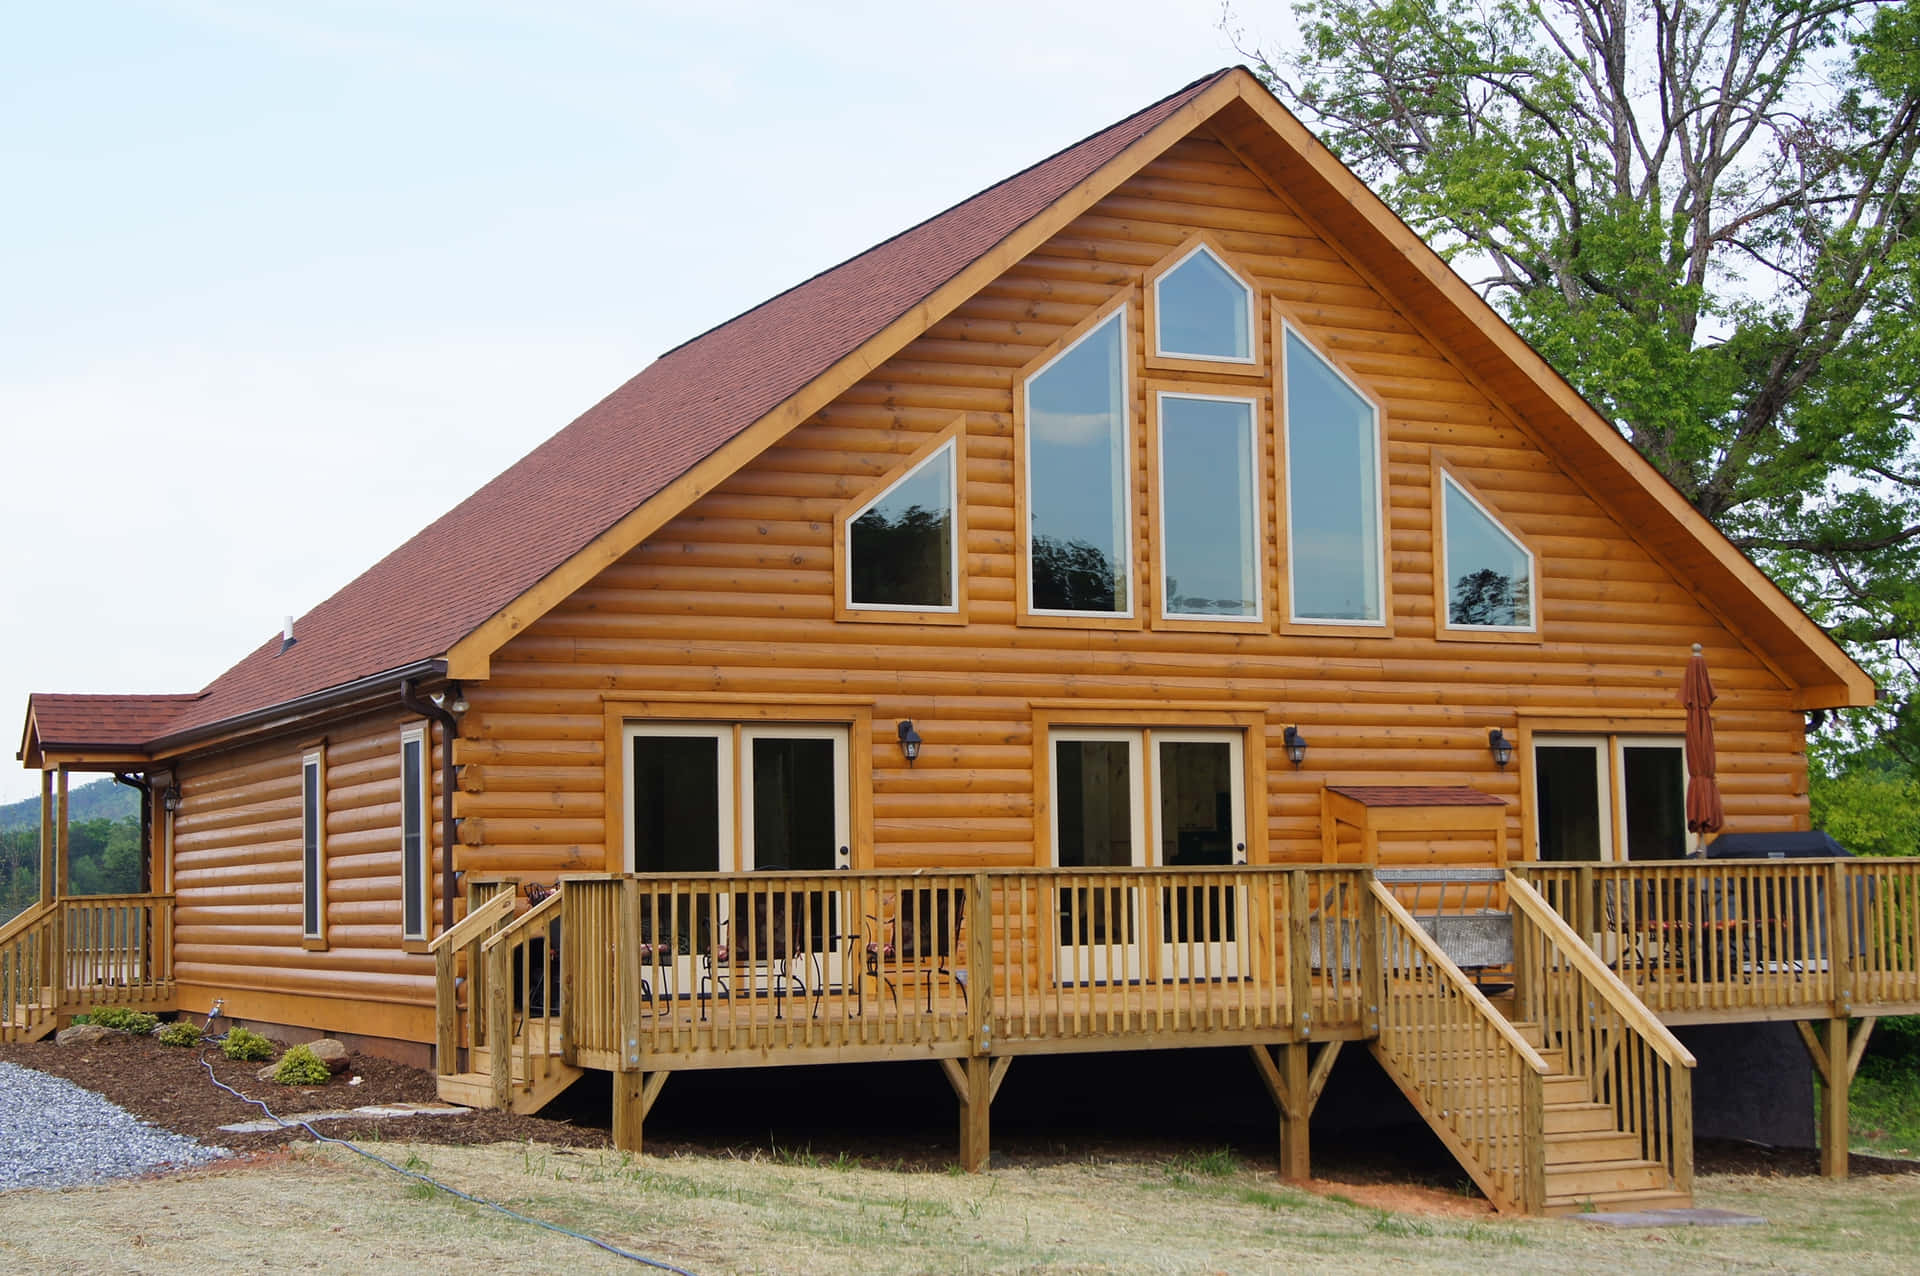 "Unwind in a peaceful log cabin surrounded by nature's beauty"